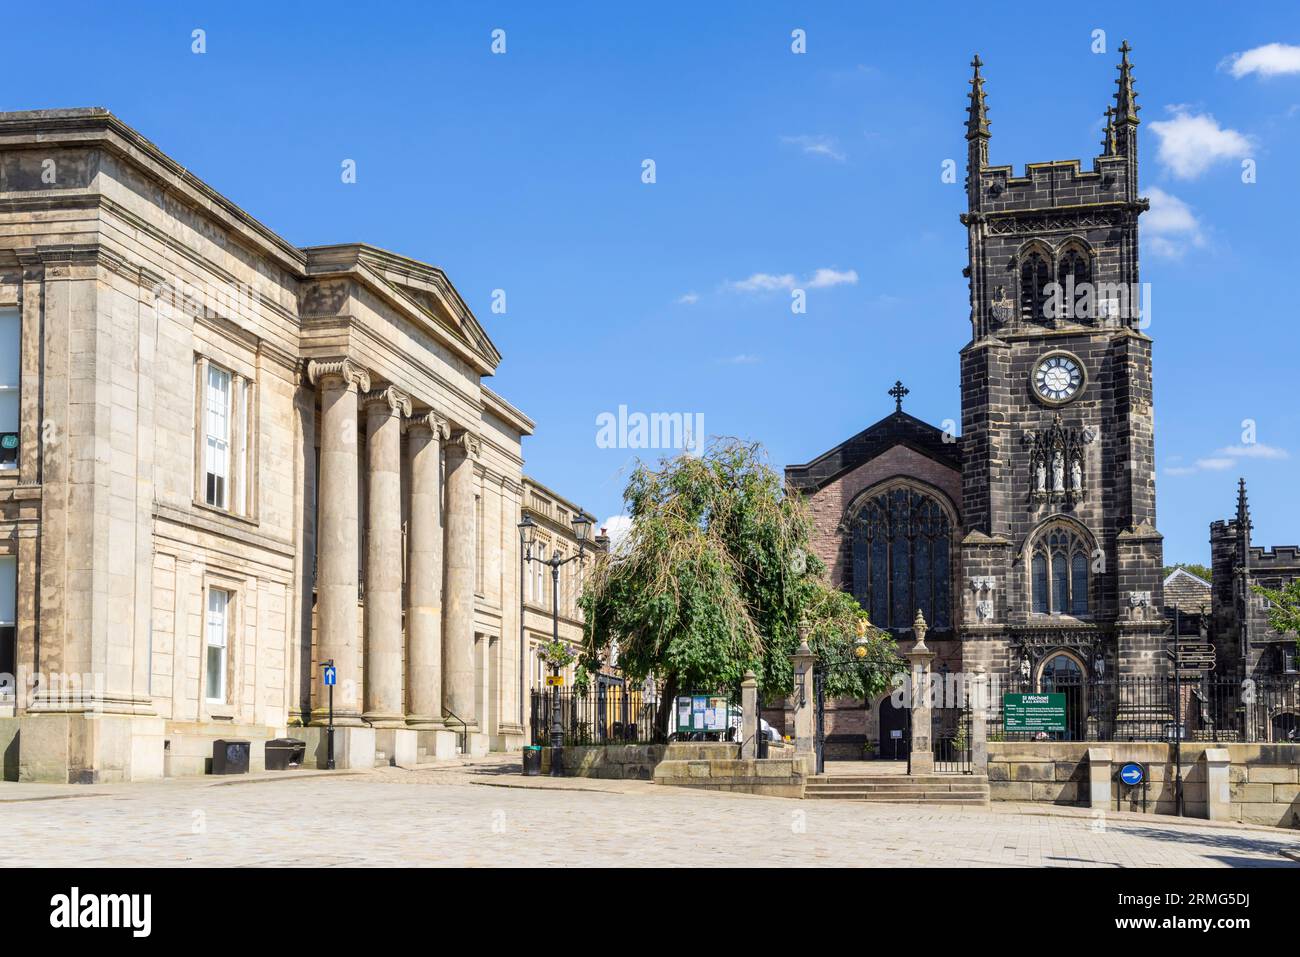 Macclesfield Town Hall Macclesfield and St Michael and All Angels Church Macclesfield Cheshire East England UK GB Europe Foto Stock